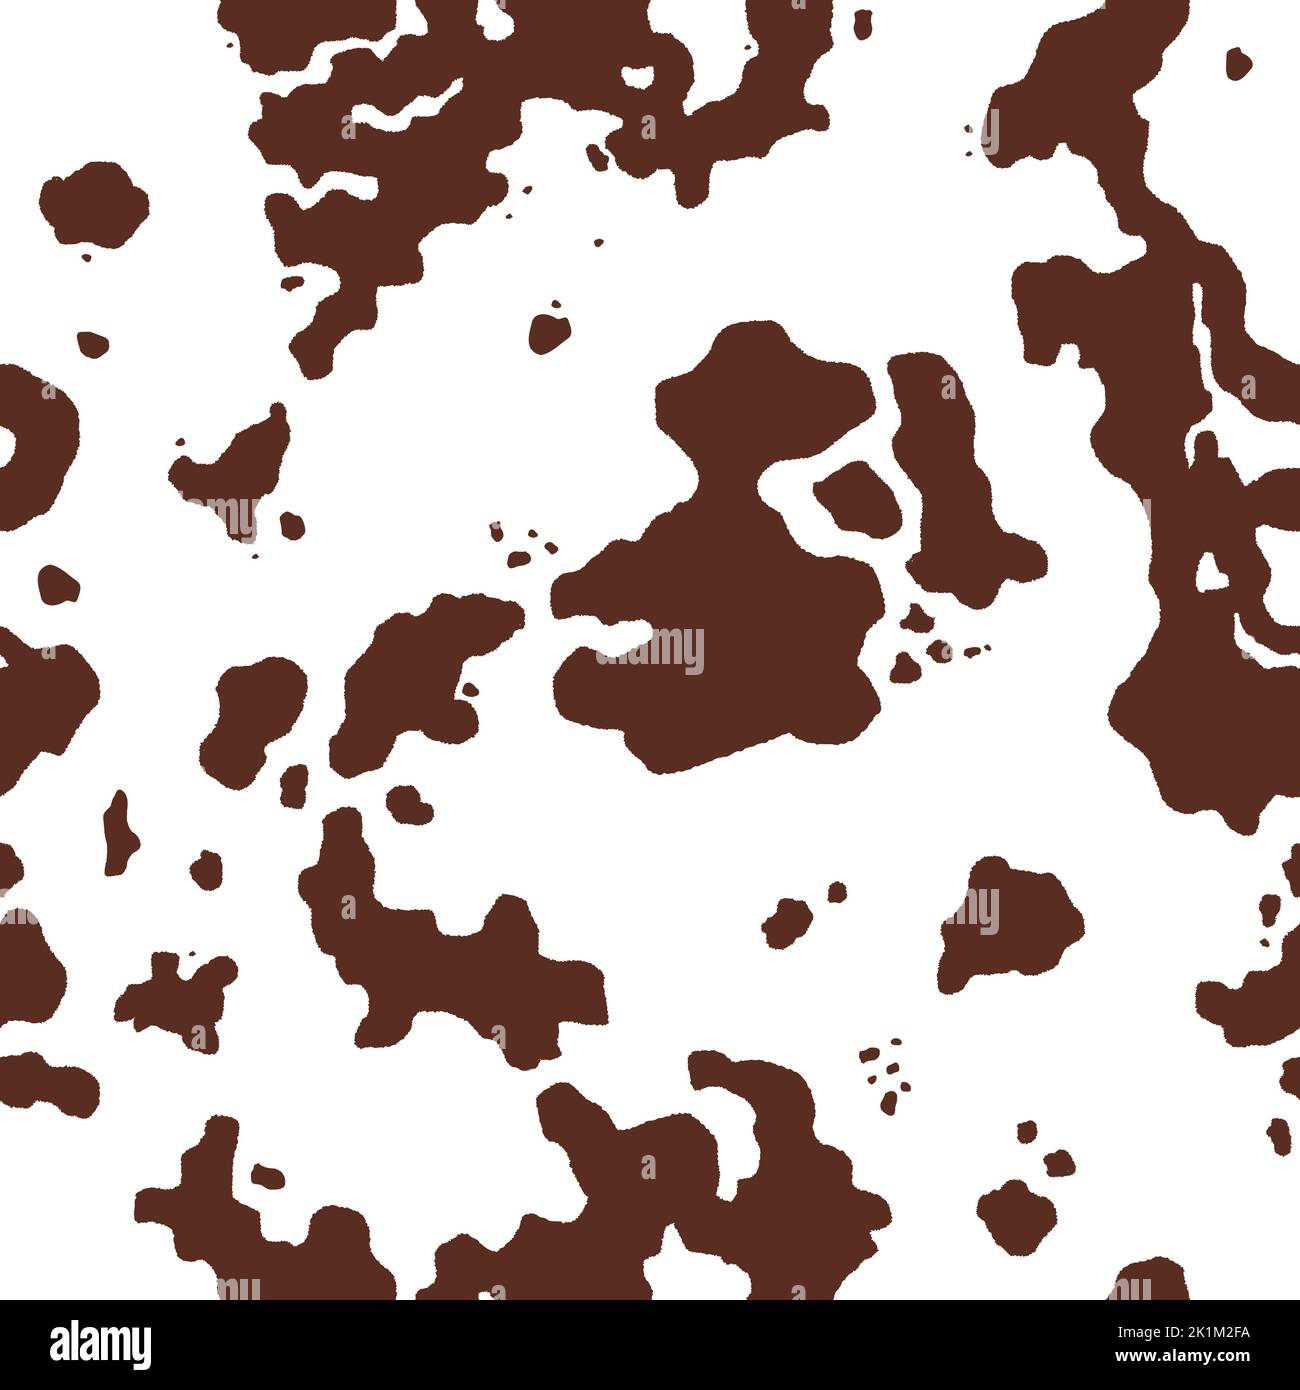 Brown spots cow texture. Cow skin pattern. Animal pattern theme. Stock Vector